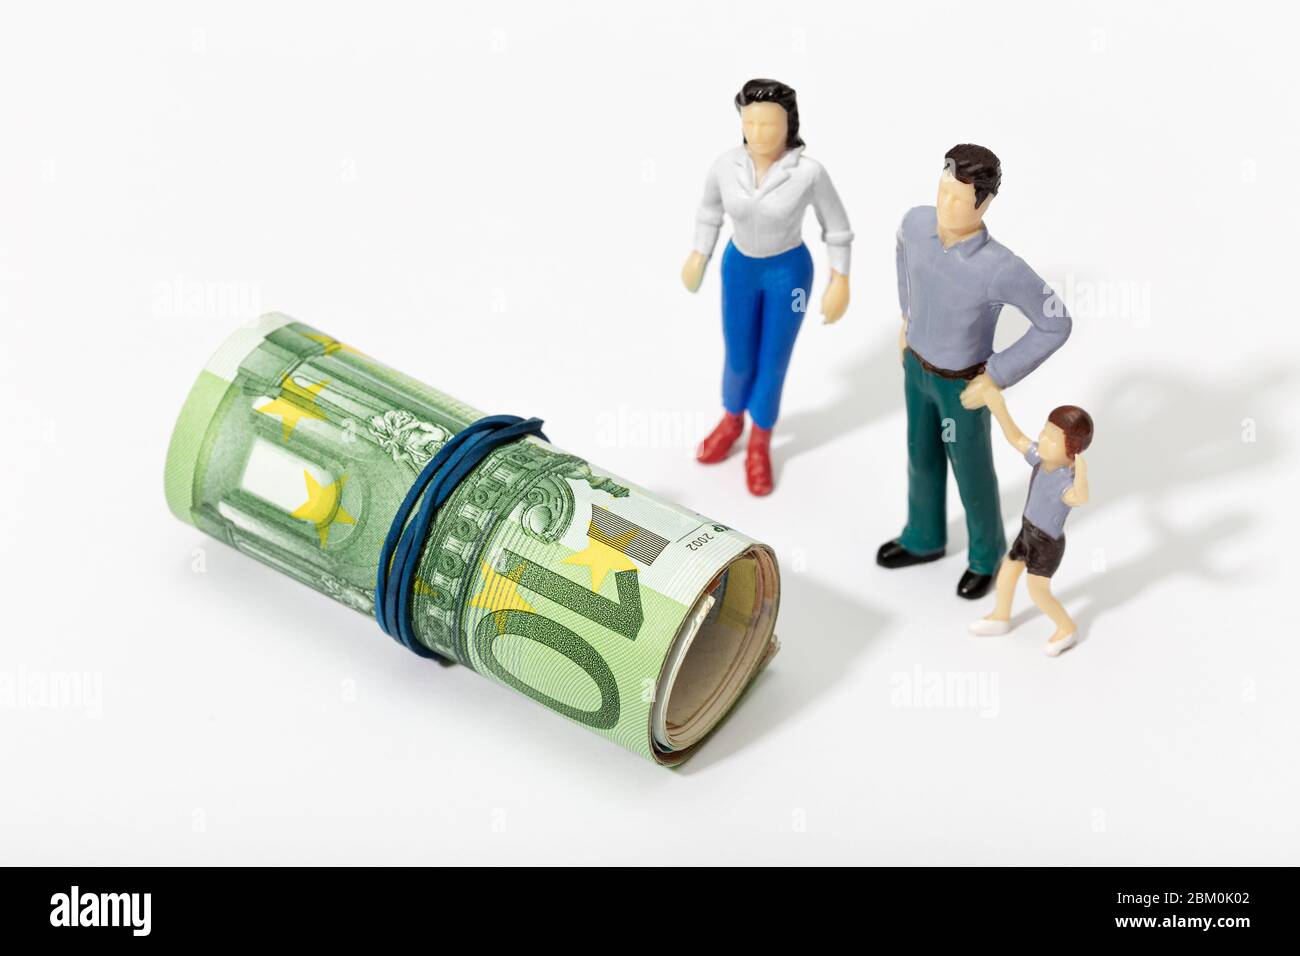 Human representation of a family looking at a Roll of money. Finance, investment or savings concept Stock Photo